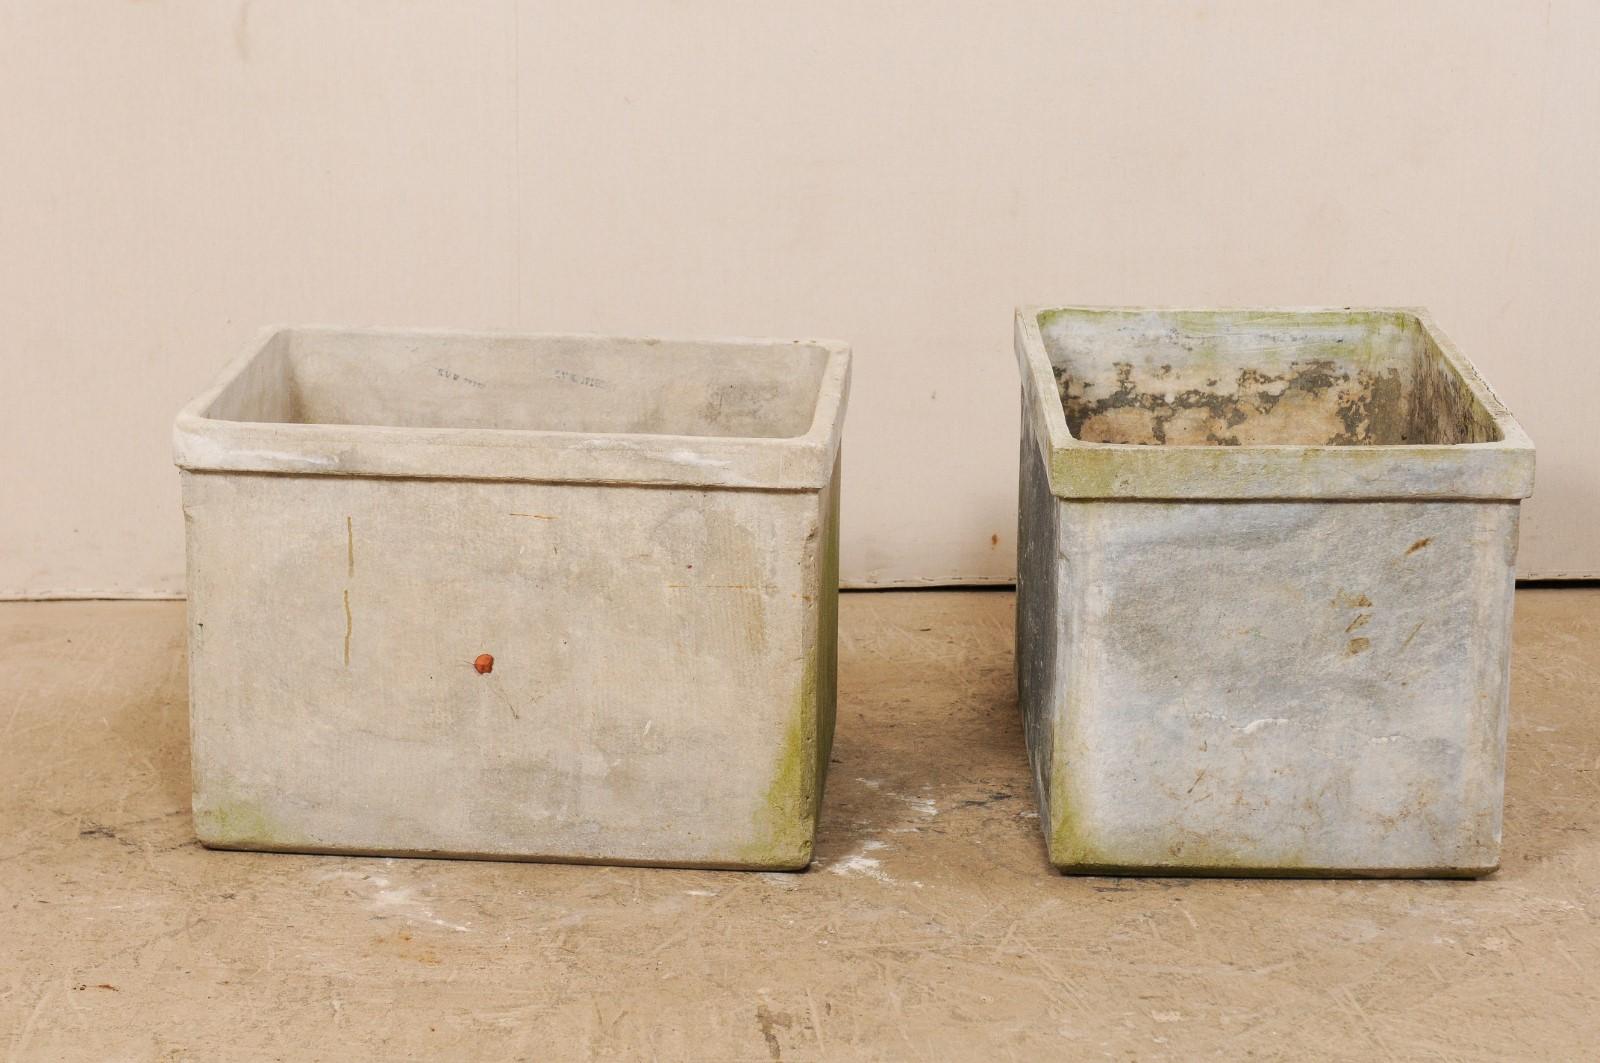 Patinated Pair of Willy Guhl Eternite, Mid-20th Century Planters For Sale